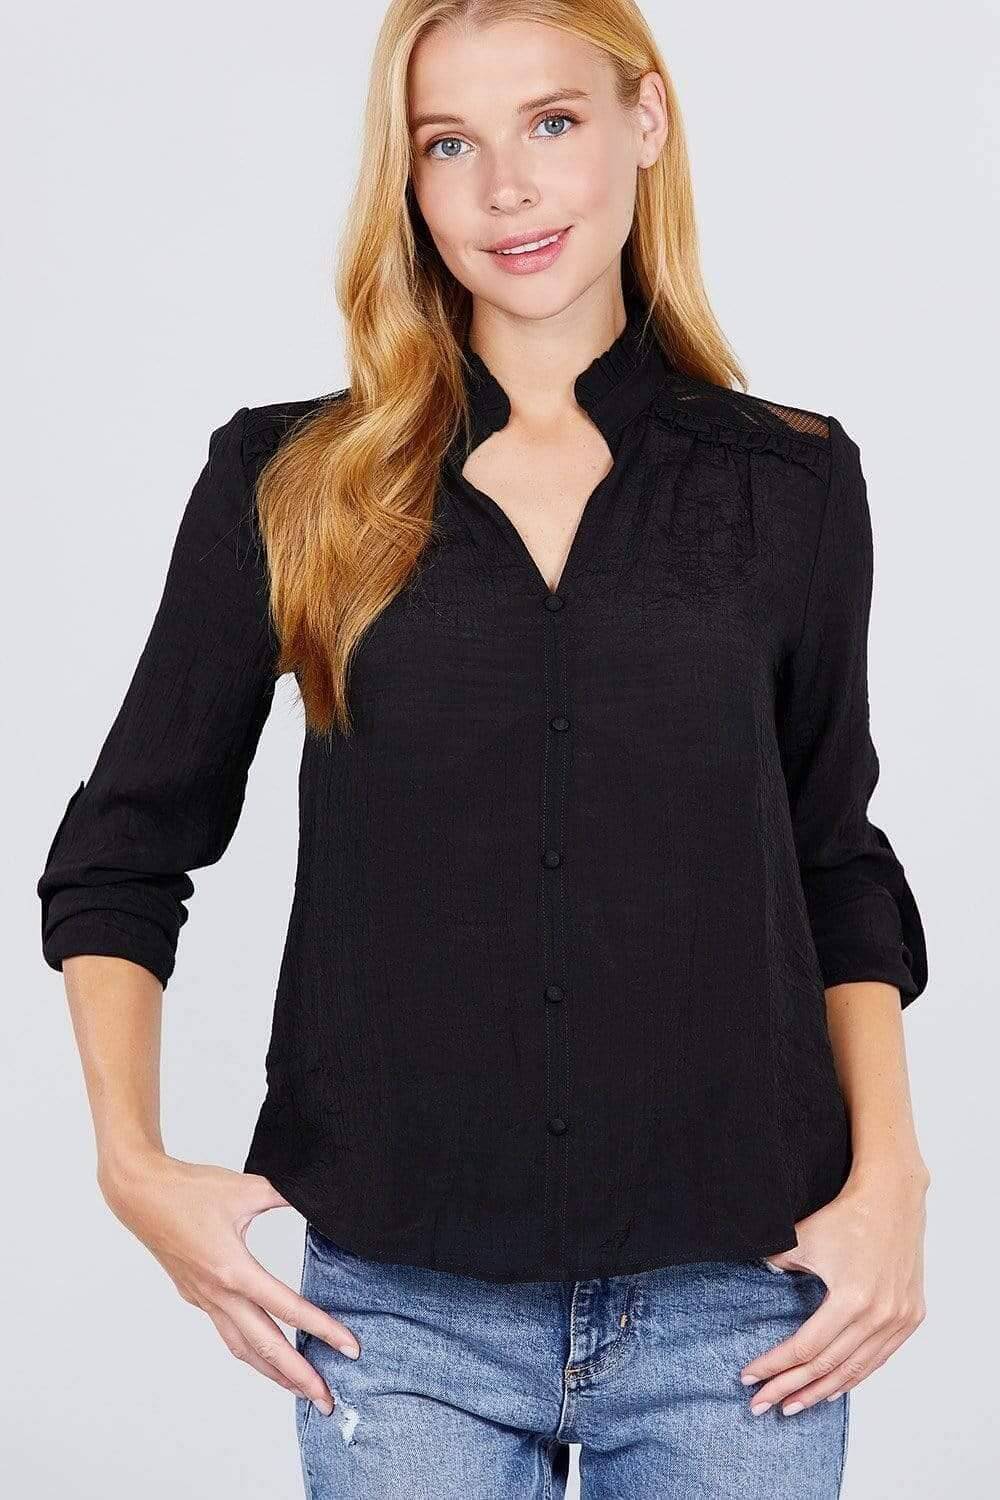 Black Long Sleeve V-Neck Button Down Top - Shopping Therapy Top